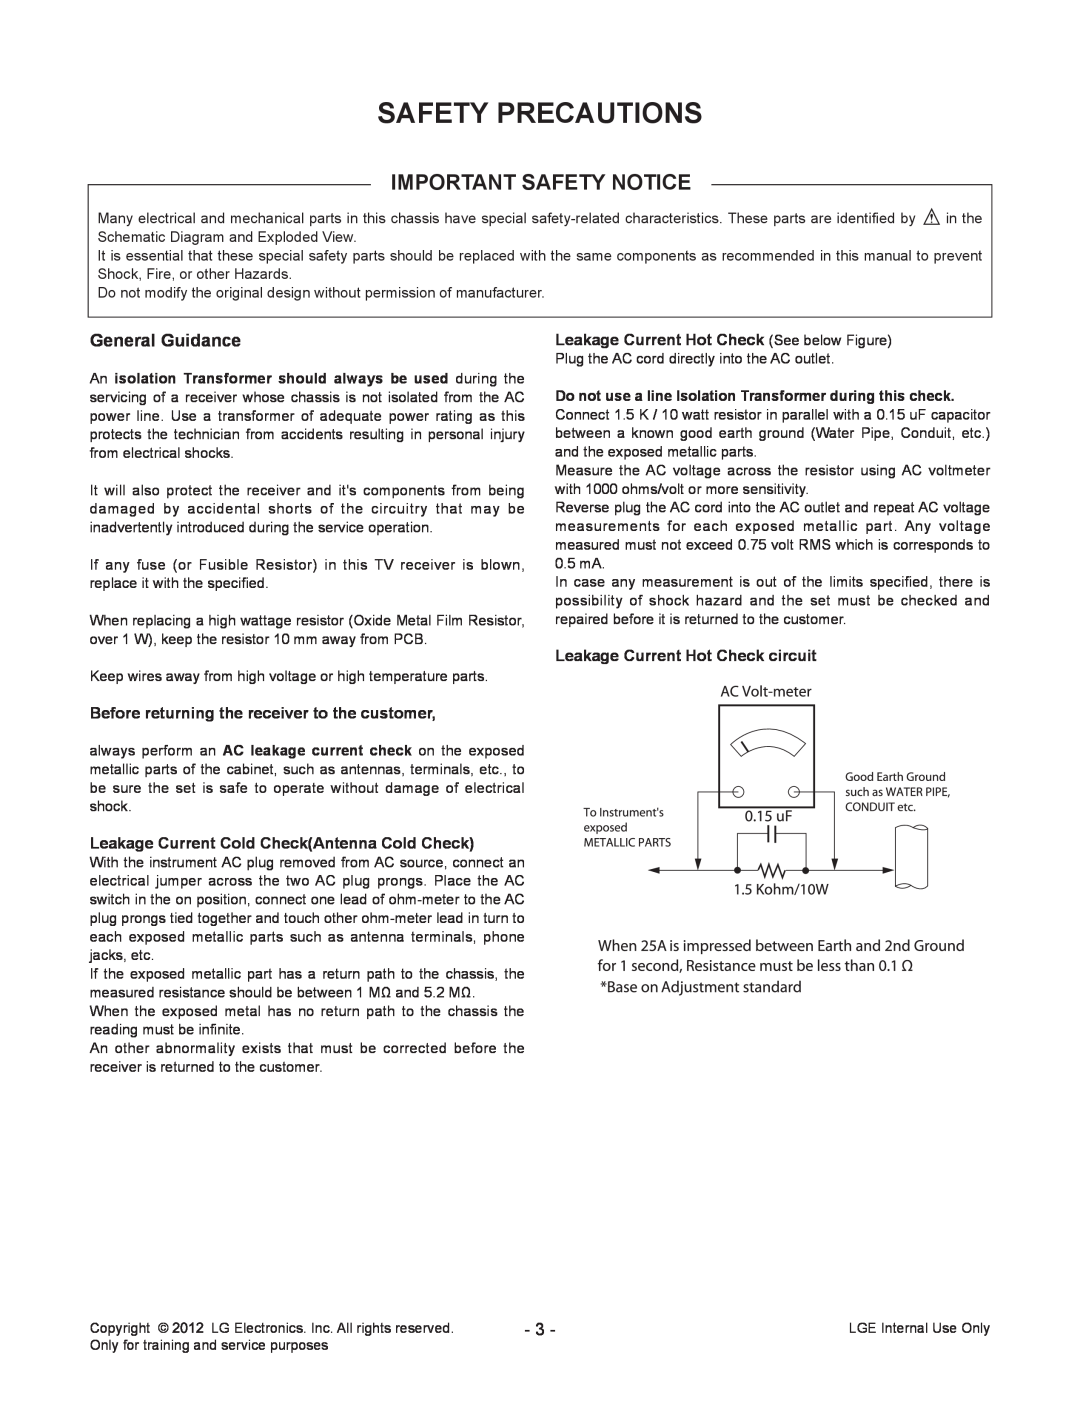 LG Electronics 47LM765S/765T-ZD Safety Precautions, Important Safety Notice, Before returning the receiver to the customer 